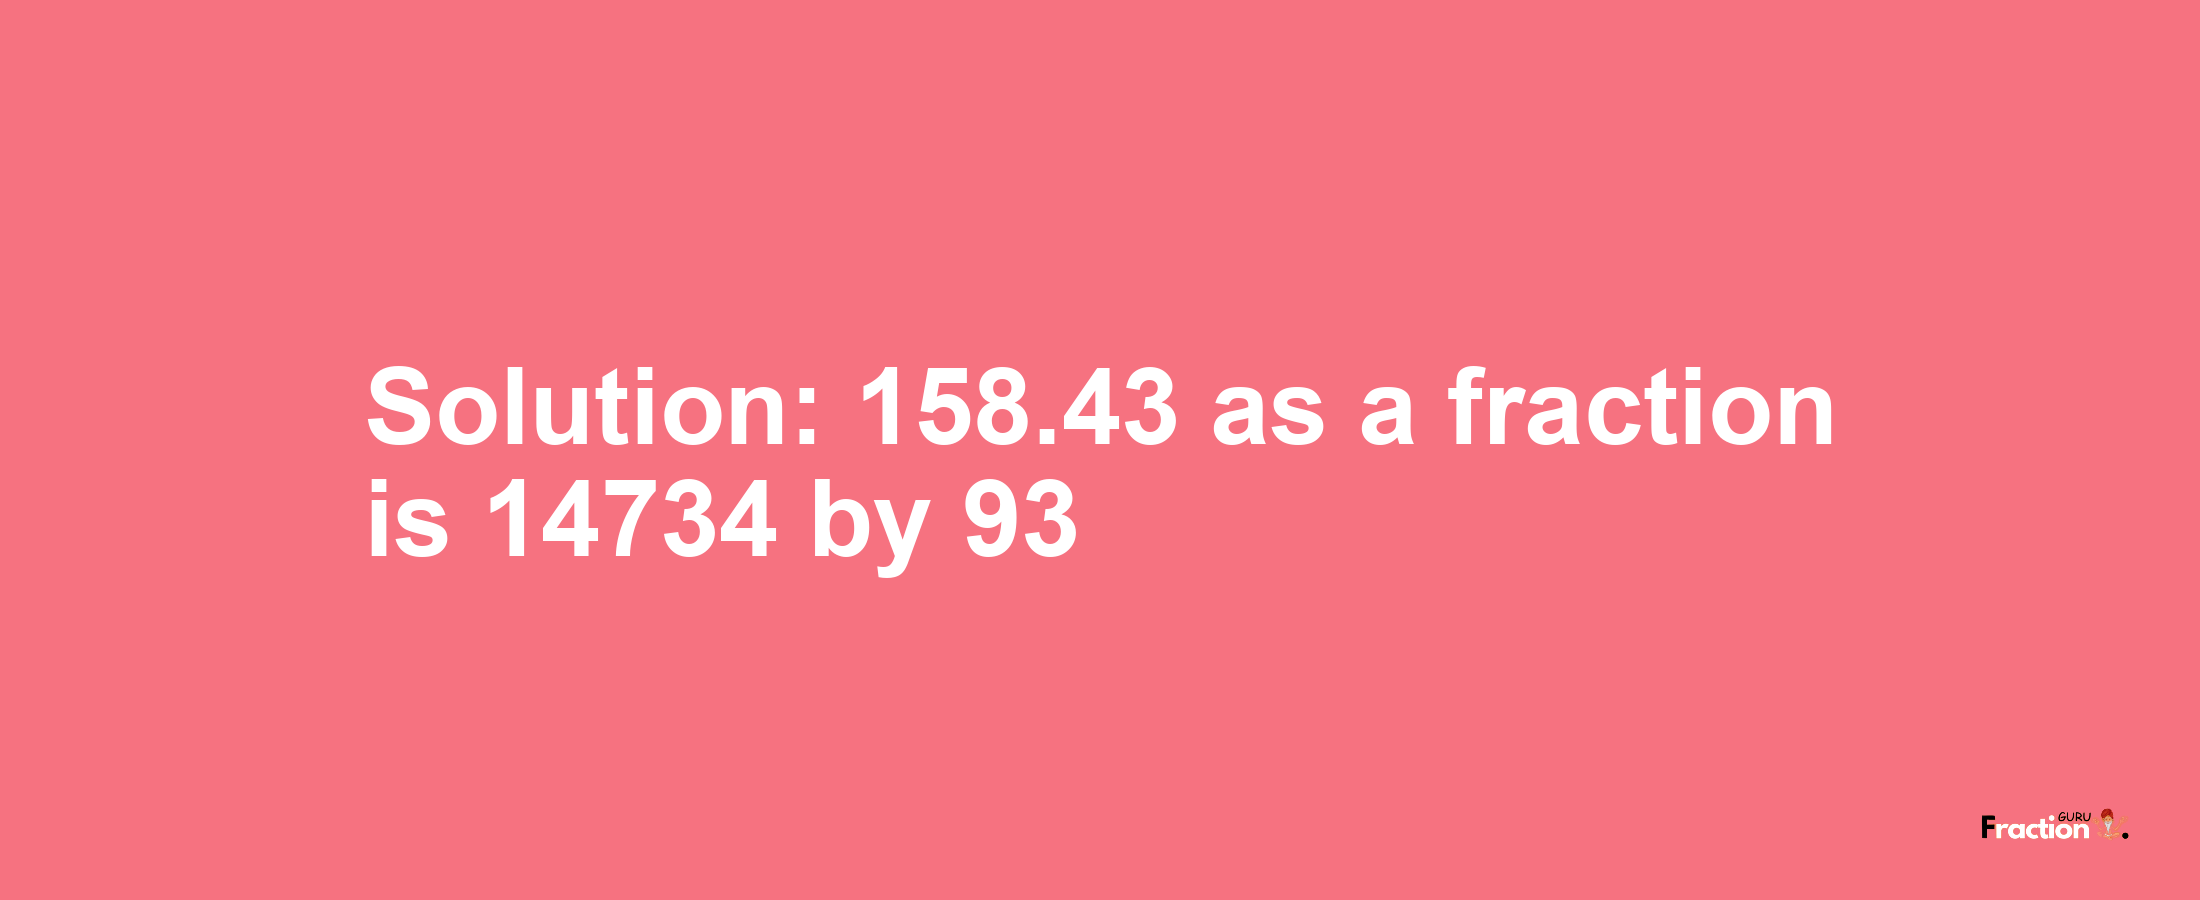 Solution:158.43 as a fraction is 14734/93